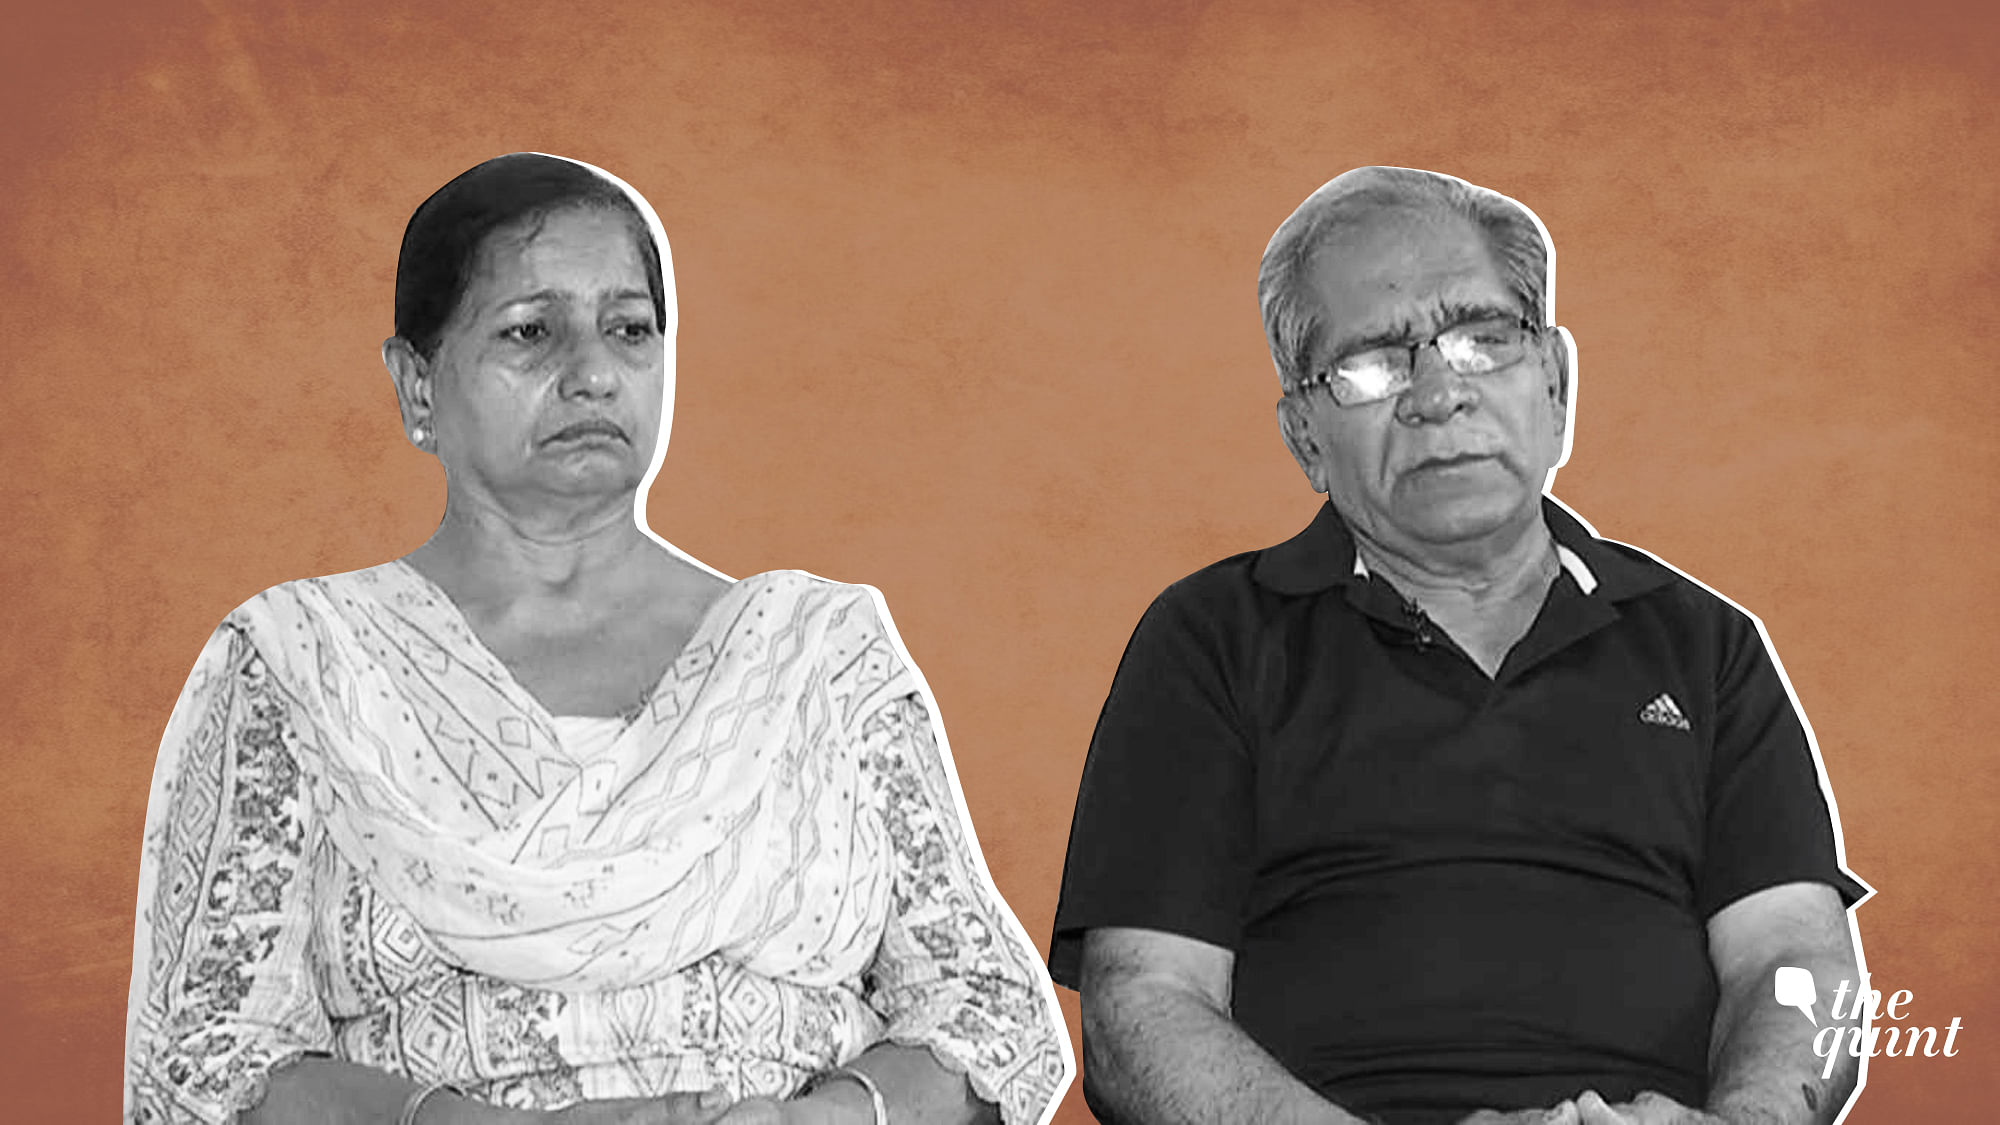 It’s barely been weeks since the news made headlines, but for her parents 70-year-old Kailash Kumar Shoree, a 1971 war veteran, and 64-year-old Arun Shoree her death is just the beginning of a long battle for justice they’re willing to take head on.